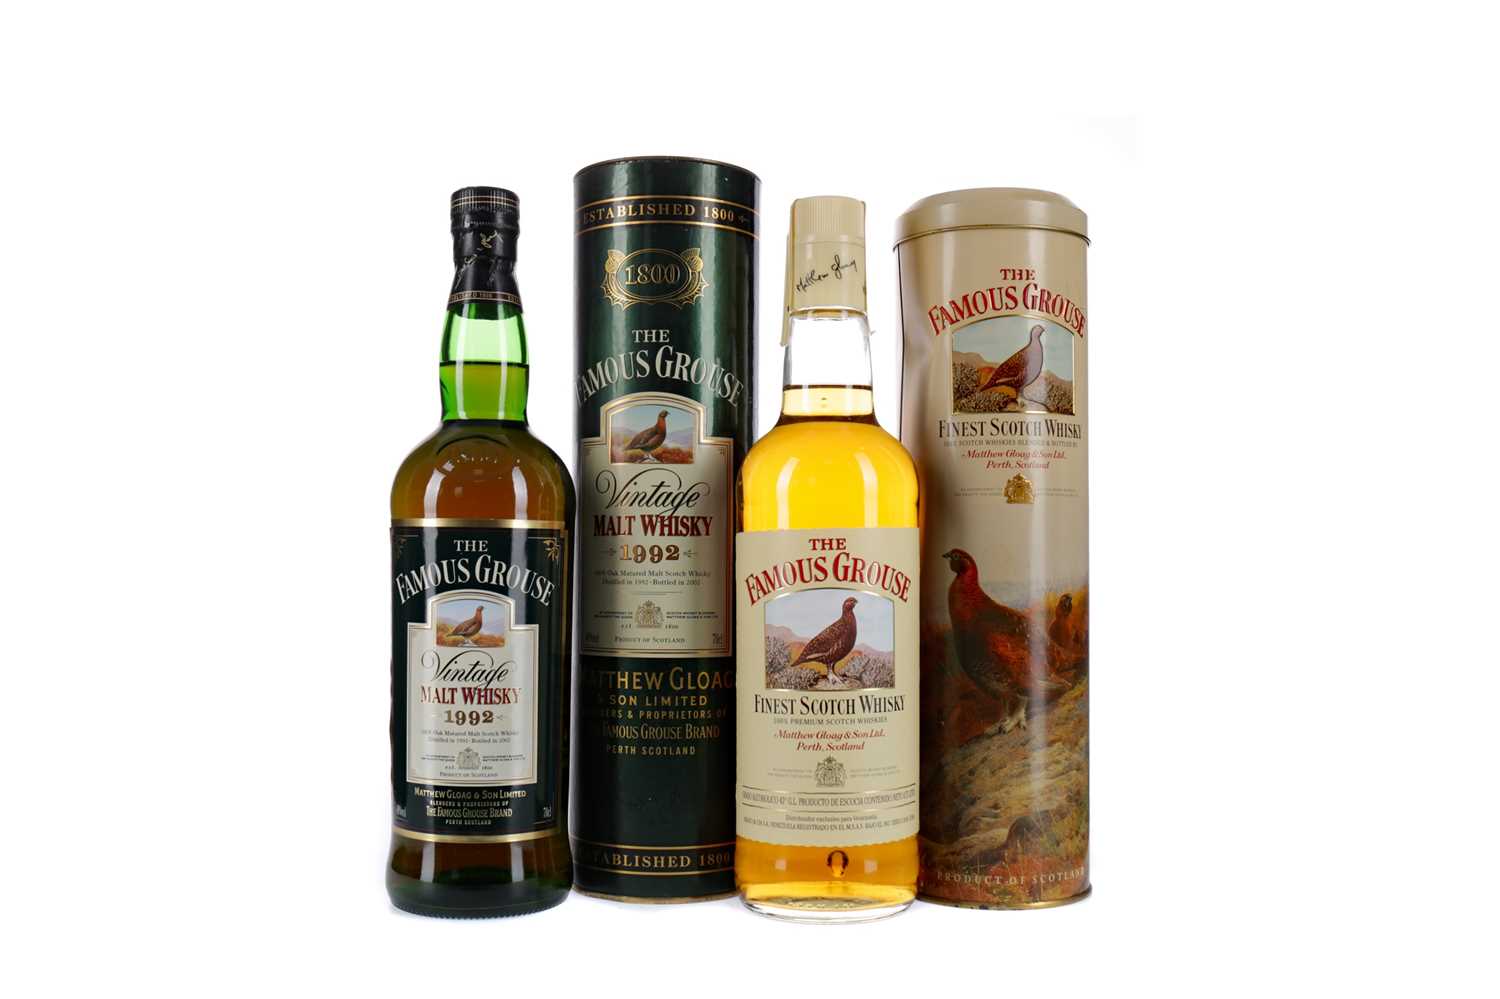 Lot 44 - FAMOUS GROUSE 1992 VINTAGE, AND FAMOUS GROUSE